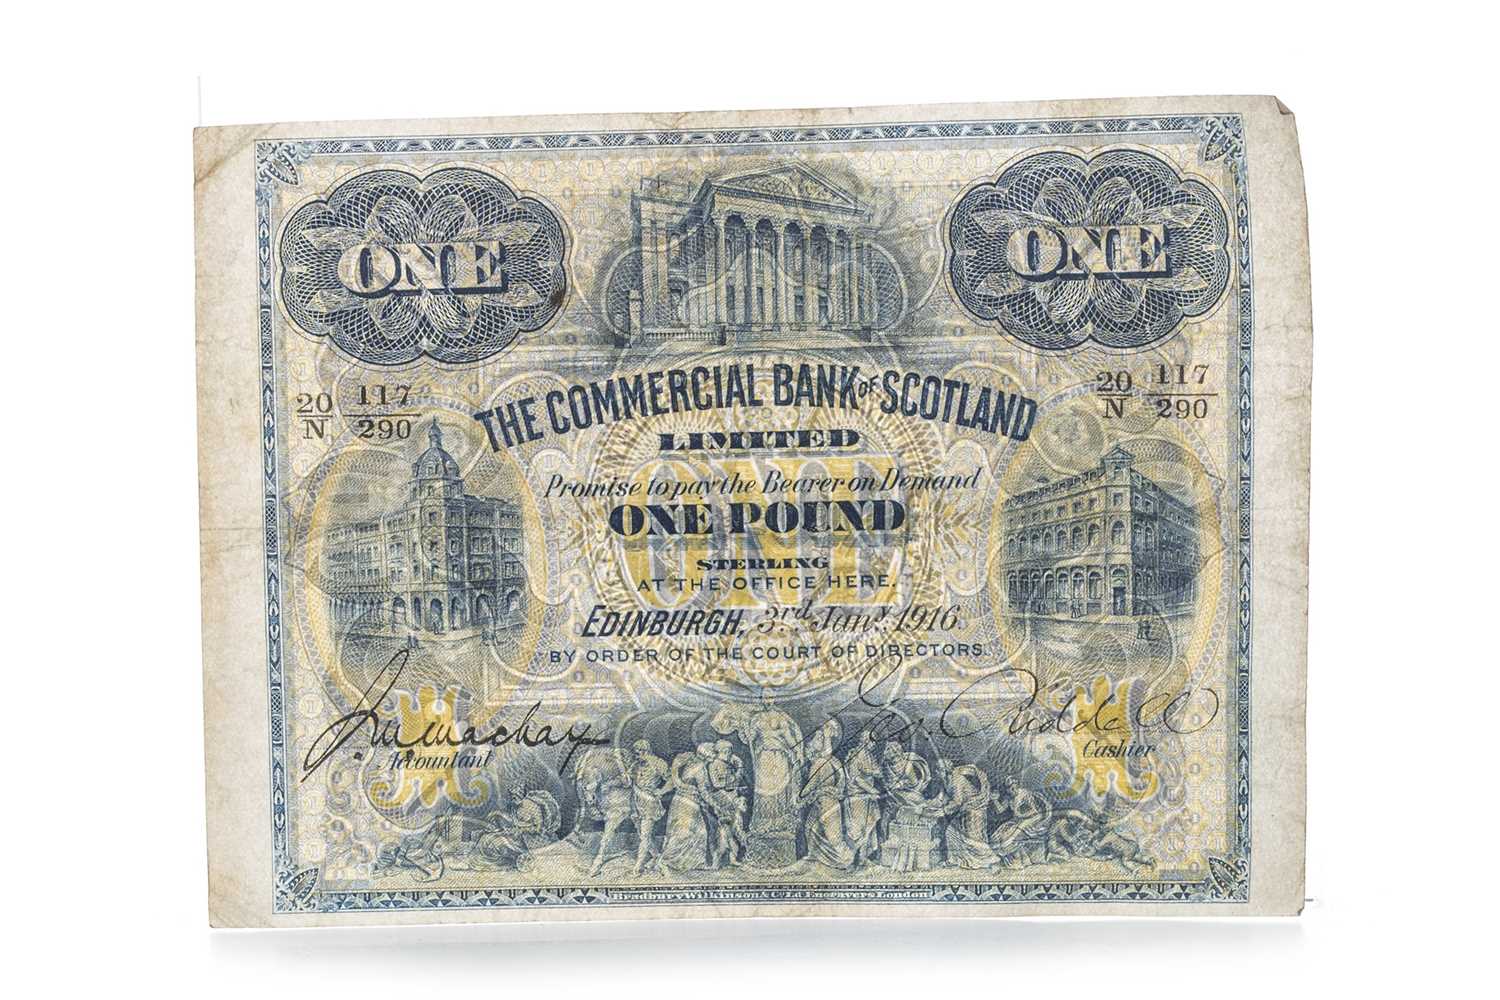 Lot 8 - THE COMMERCIAL BANK OF SCOTLAND ONE POUND £1 NOTE